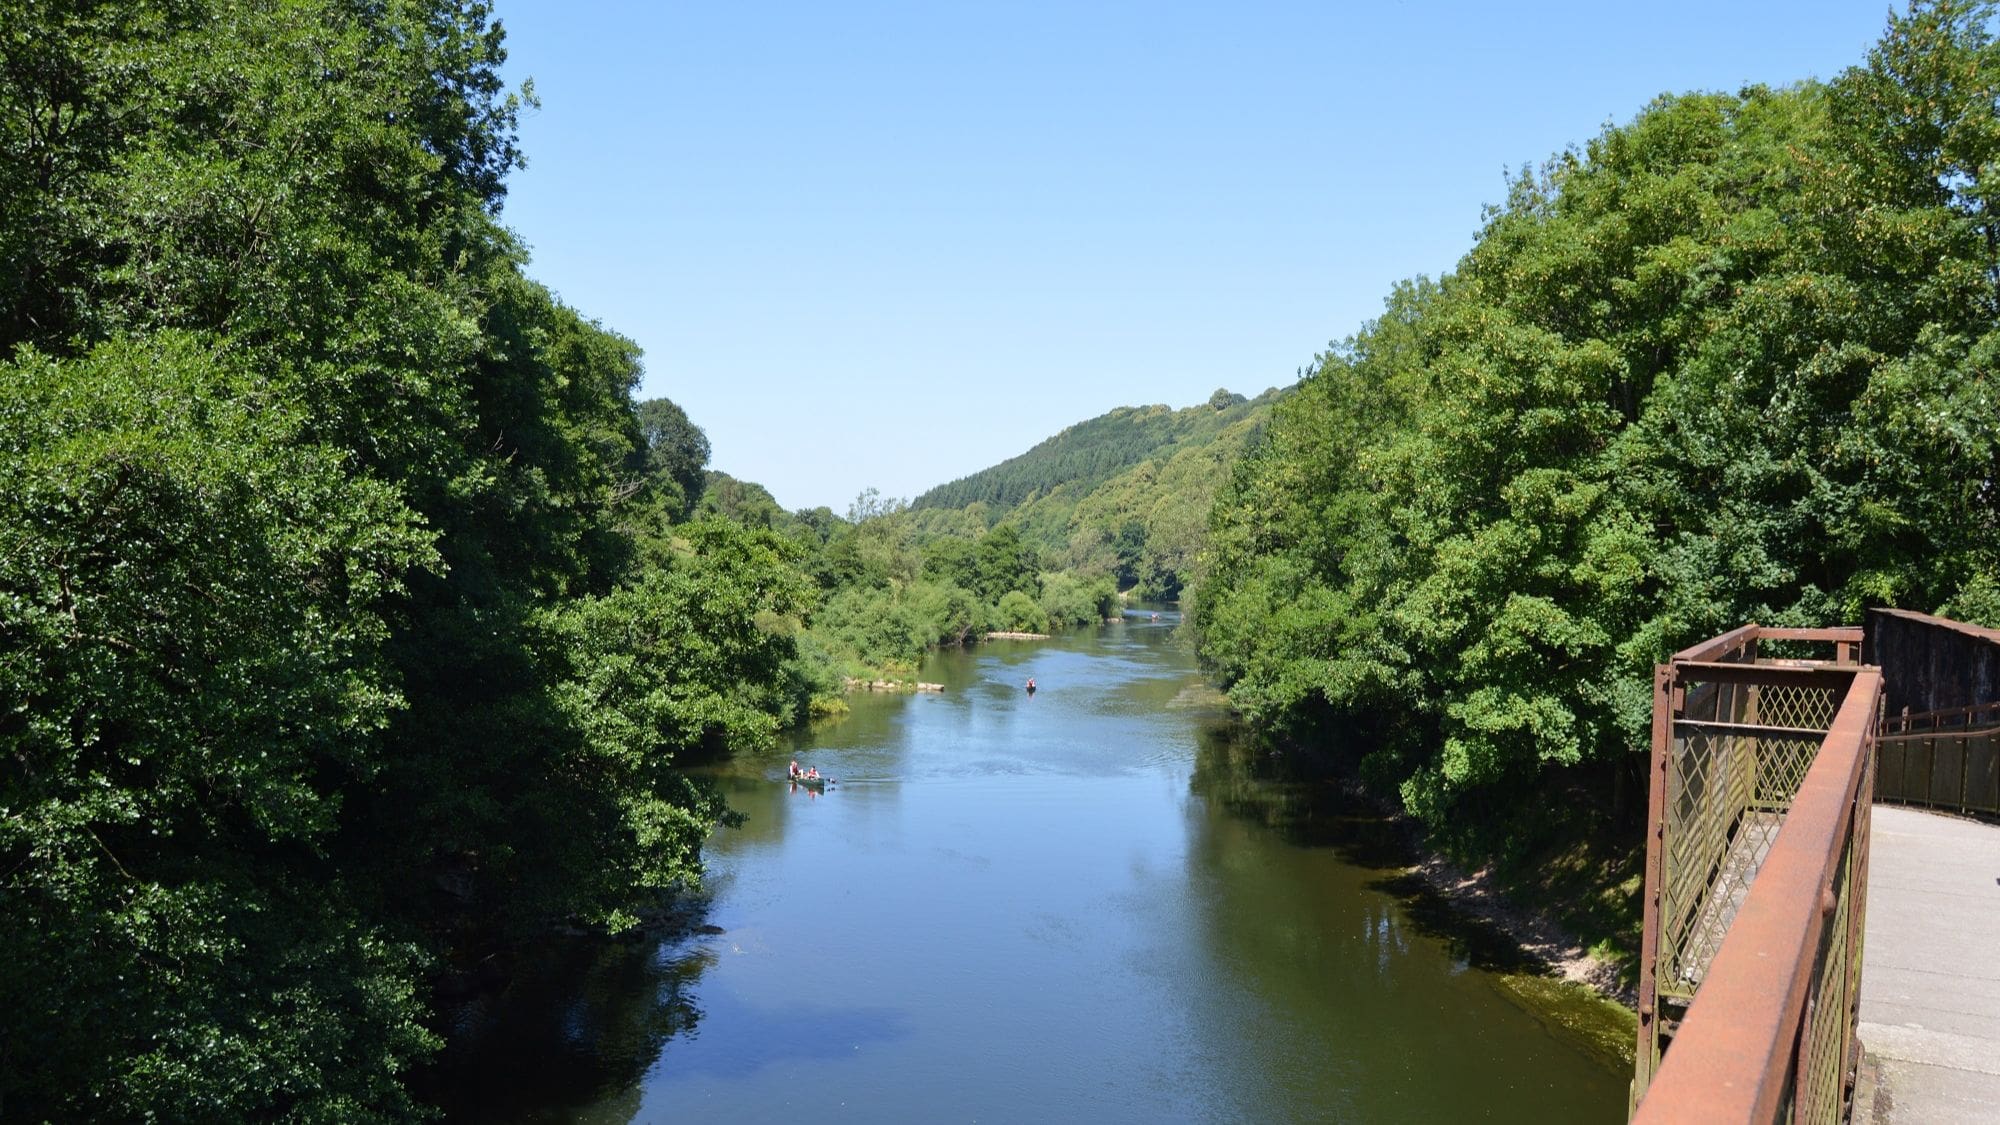 View of the river wye from Penallt Viaduct